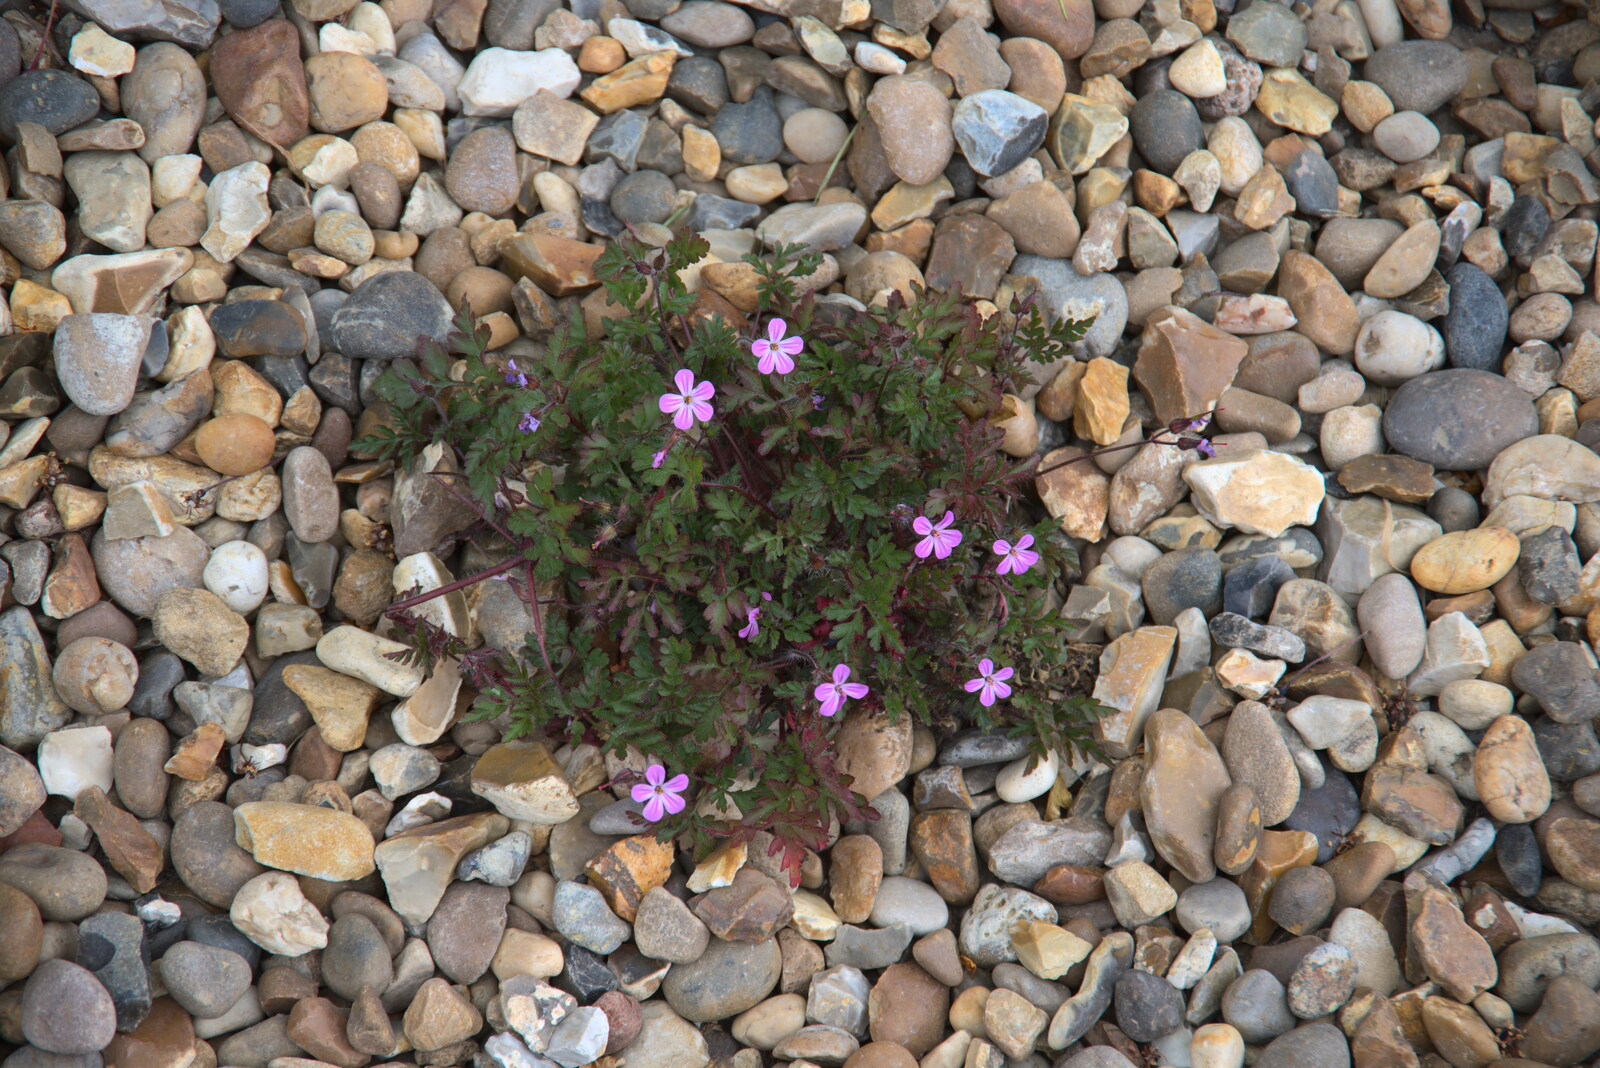 A weed with pretty pink flowers grows in the drive from More Lockdown Fun, Diss and Eye, Norfolk and Suffolk - 30th May 2020